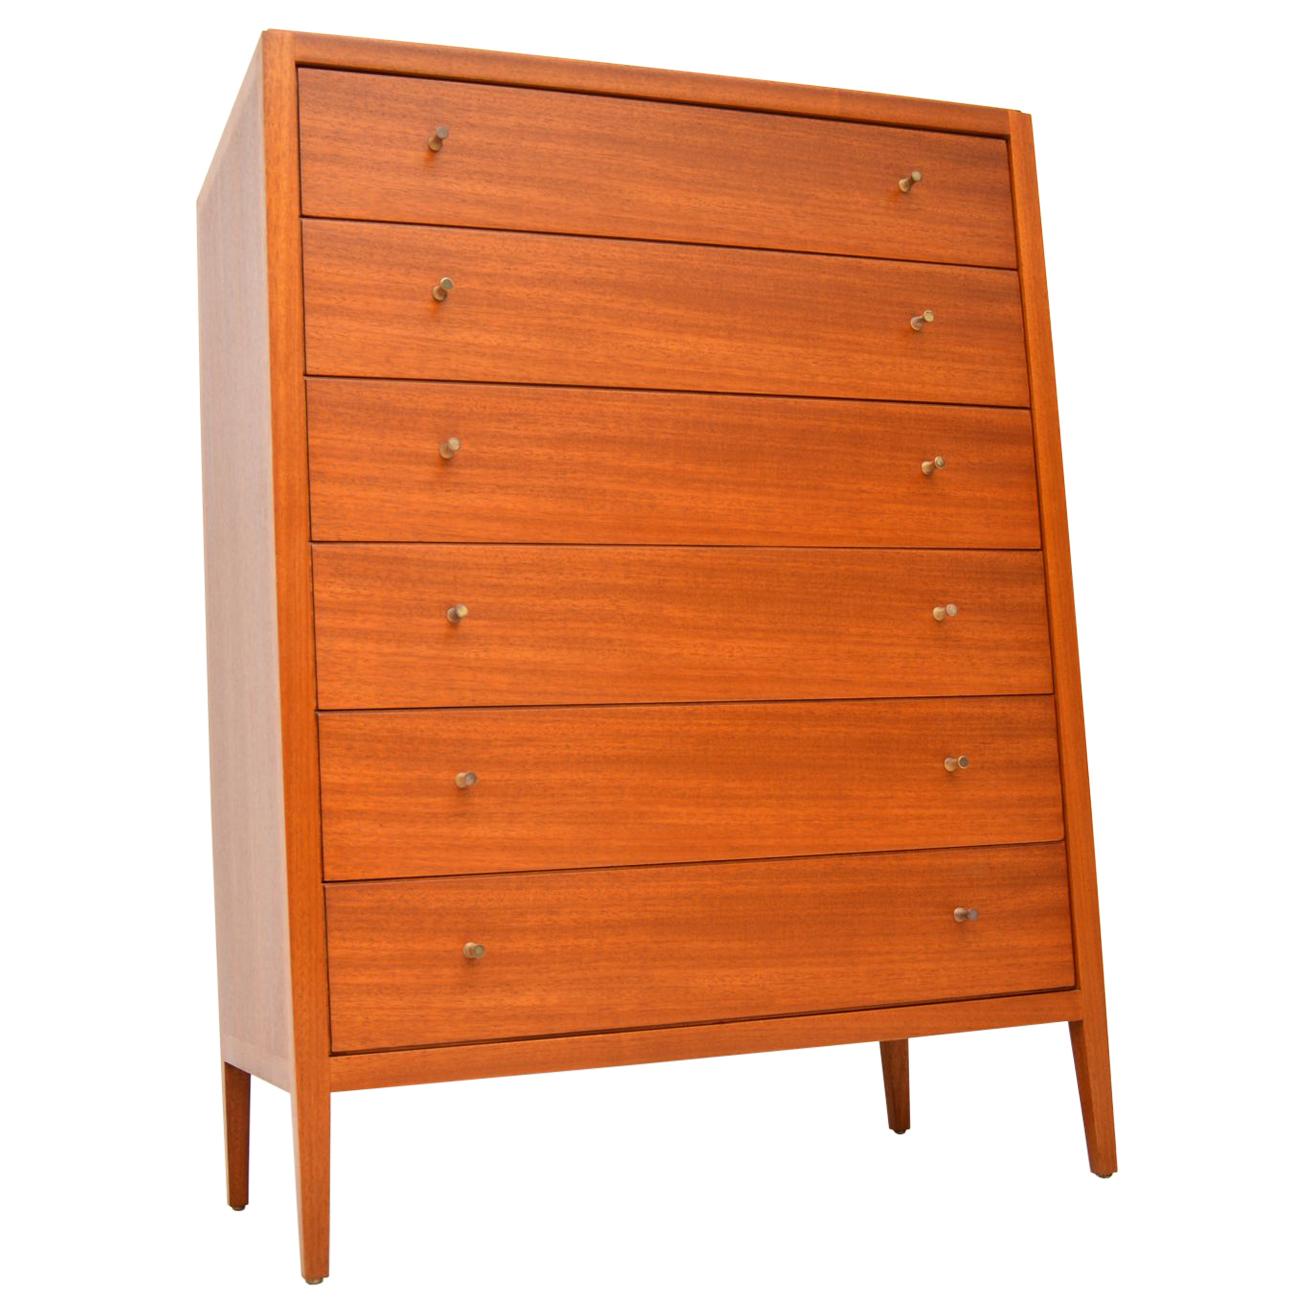 1960s Vintage Mahogany Tall Boy Chest of Drawers